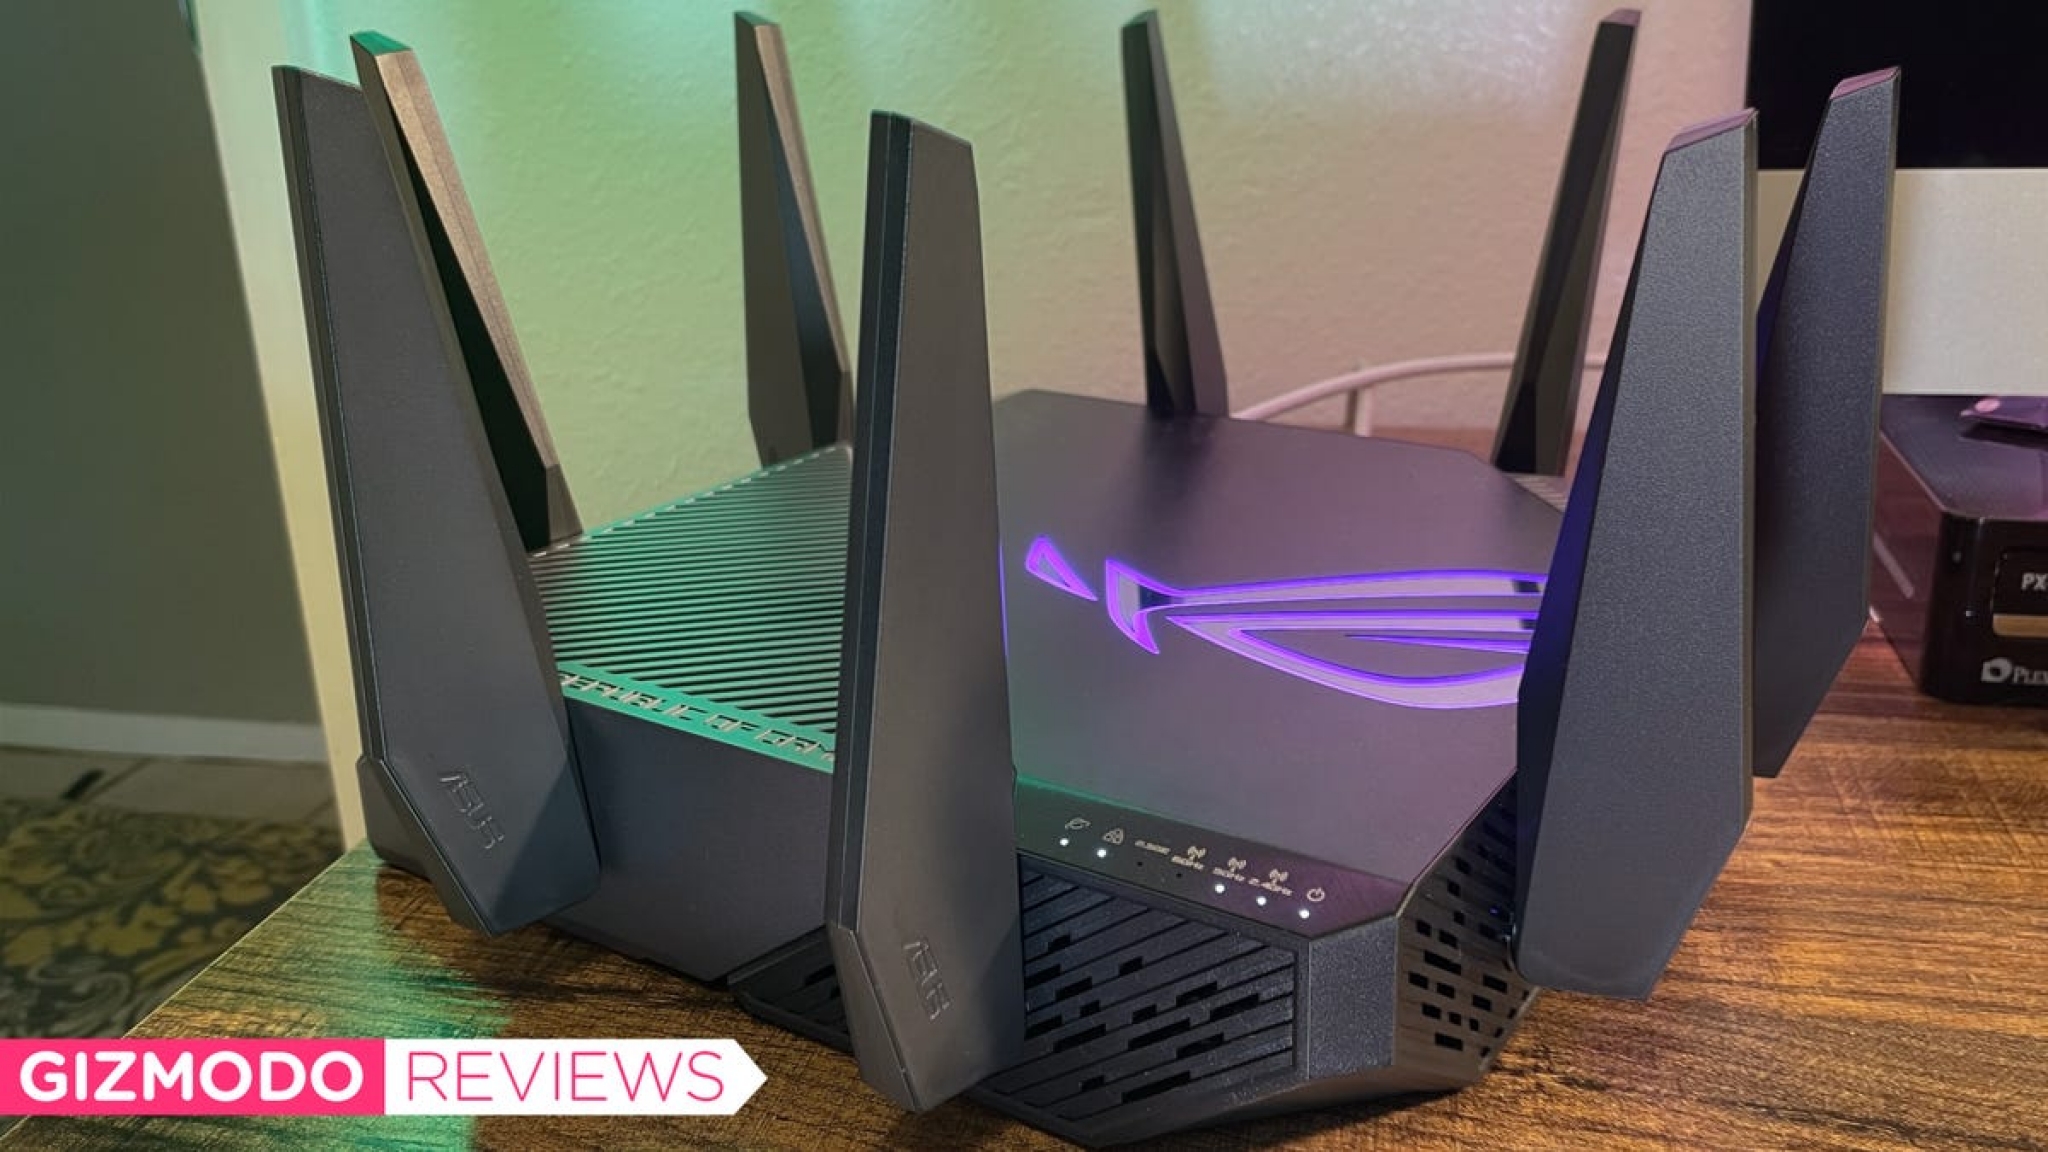 Asus’ First Wi-Fi 6E Router Is a Beast for Gaming, but Struggles Everywhere Else